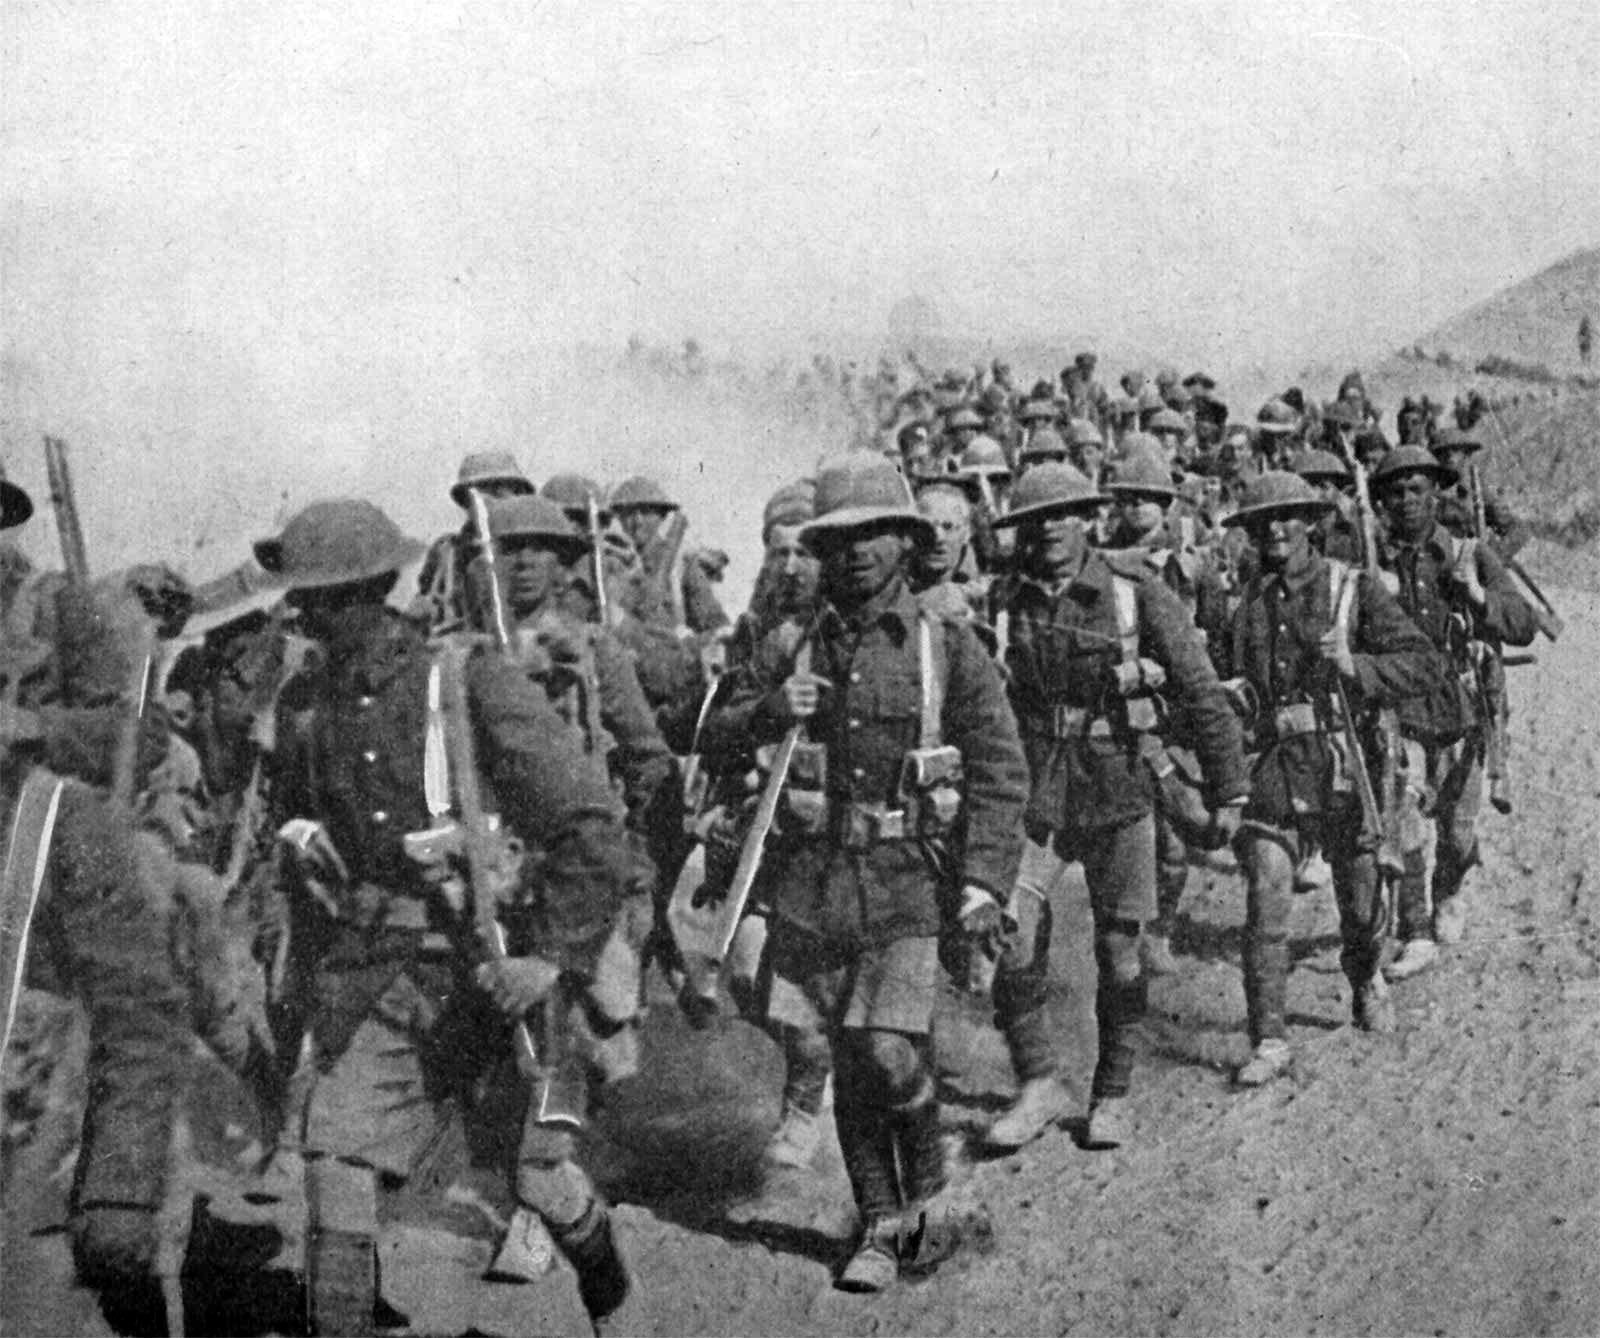 british-troops-on-the-march-during-mesopotamian-campaign-world-war-i.jpg